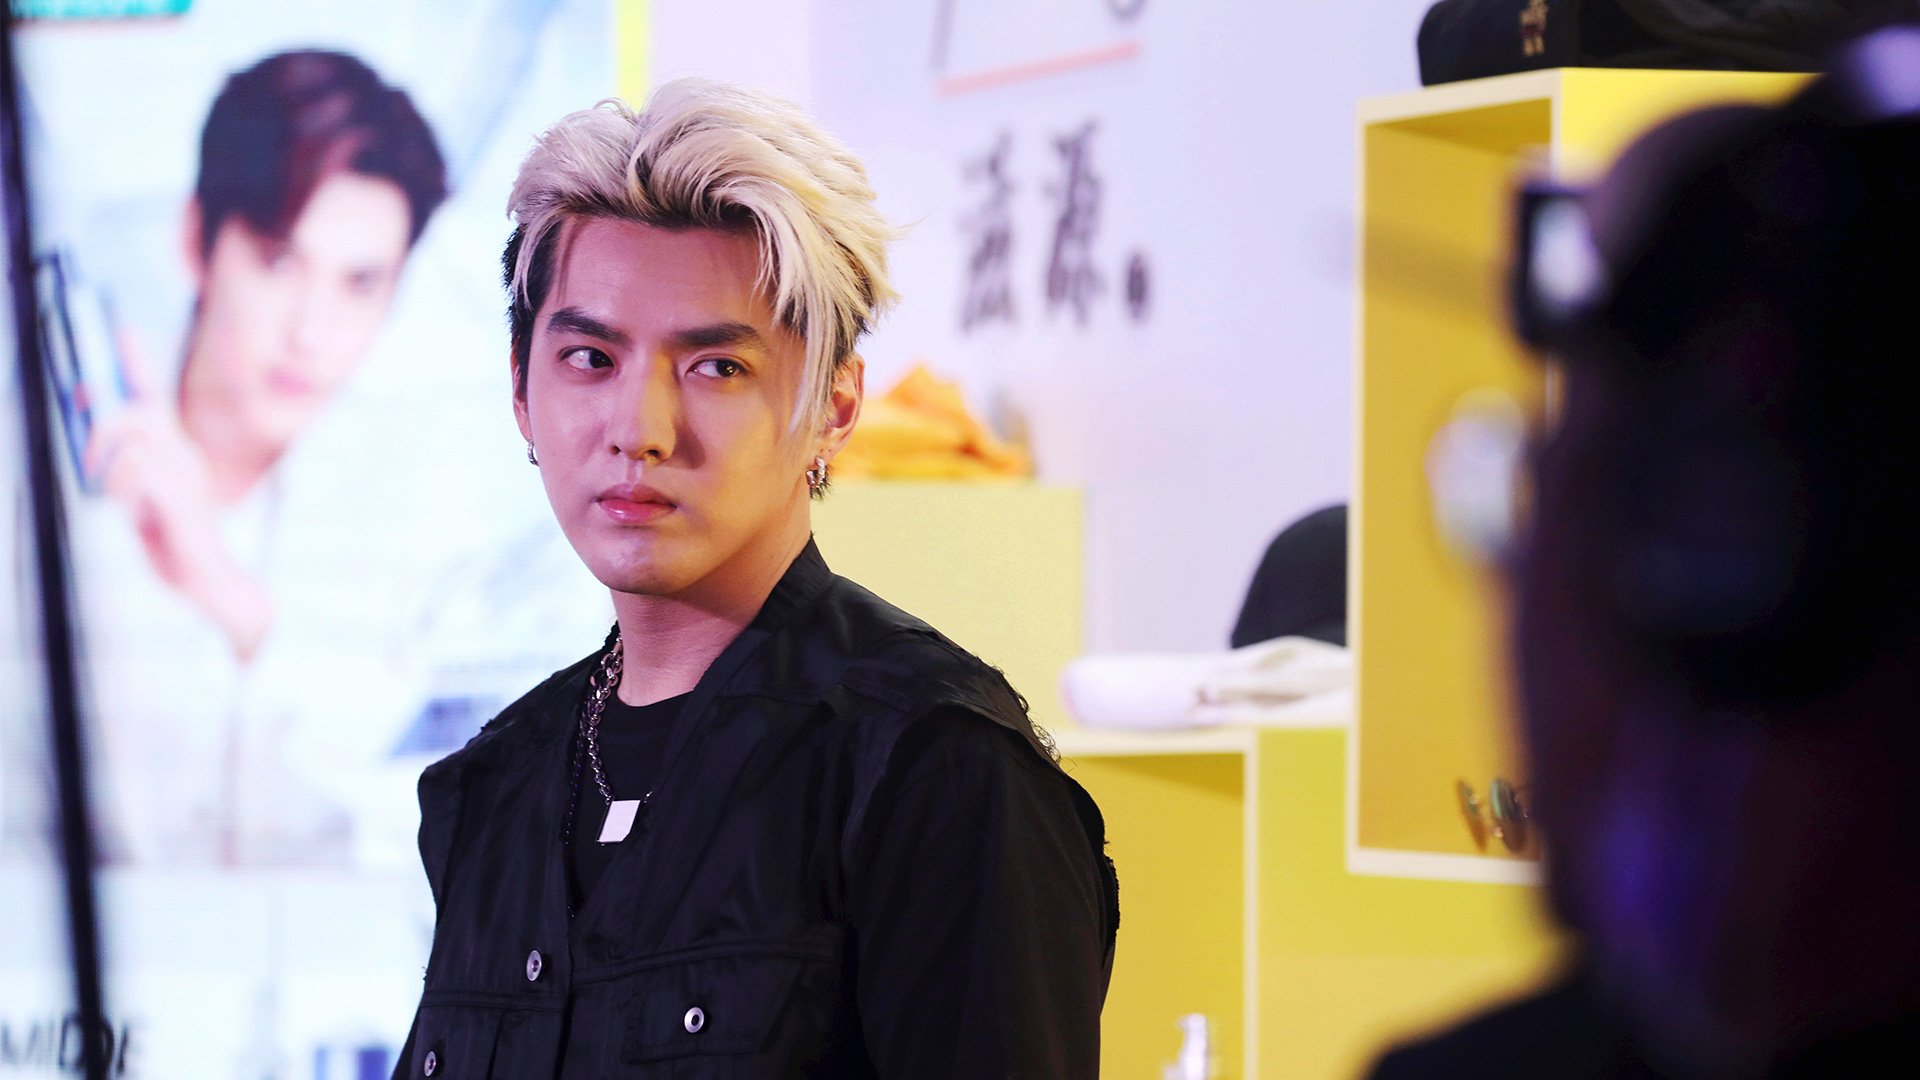 Kris Wu removed from Chinese social media and nearly 1,000 supporters'  accounts meet the same fate following rape allegations | South China  Morning Post